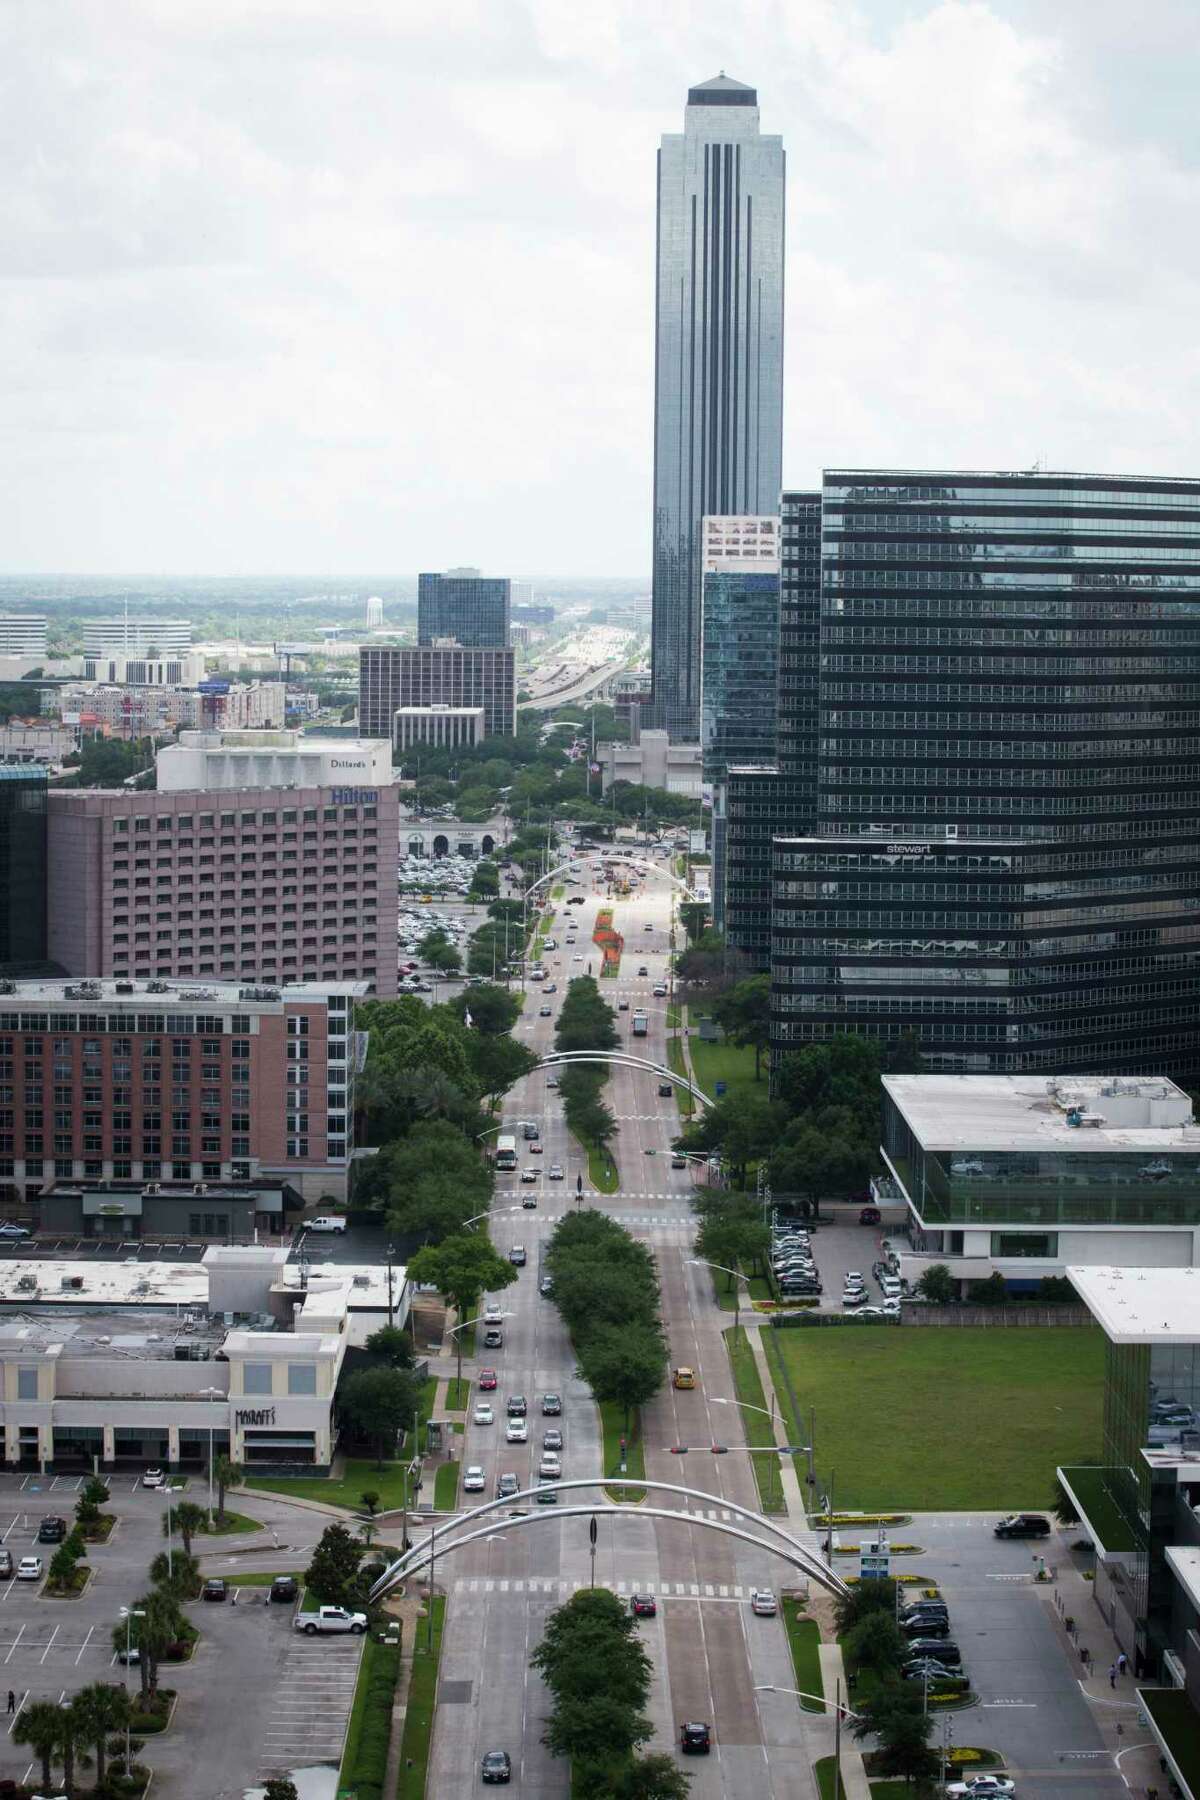 View of Post Oak Boulevard and the Williams Tower.